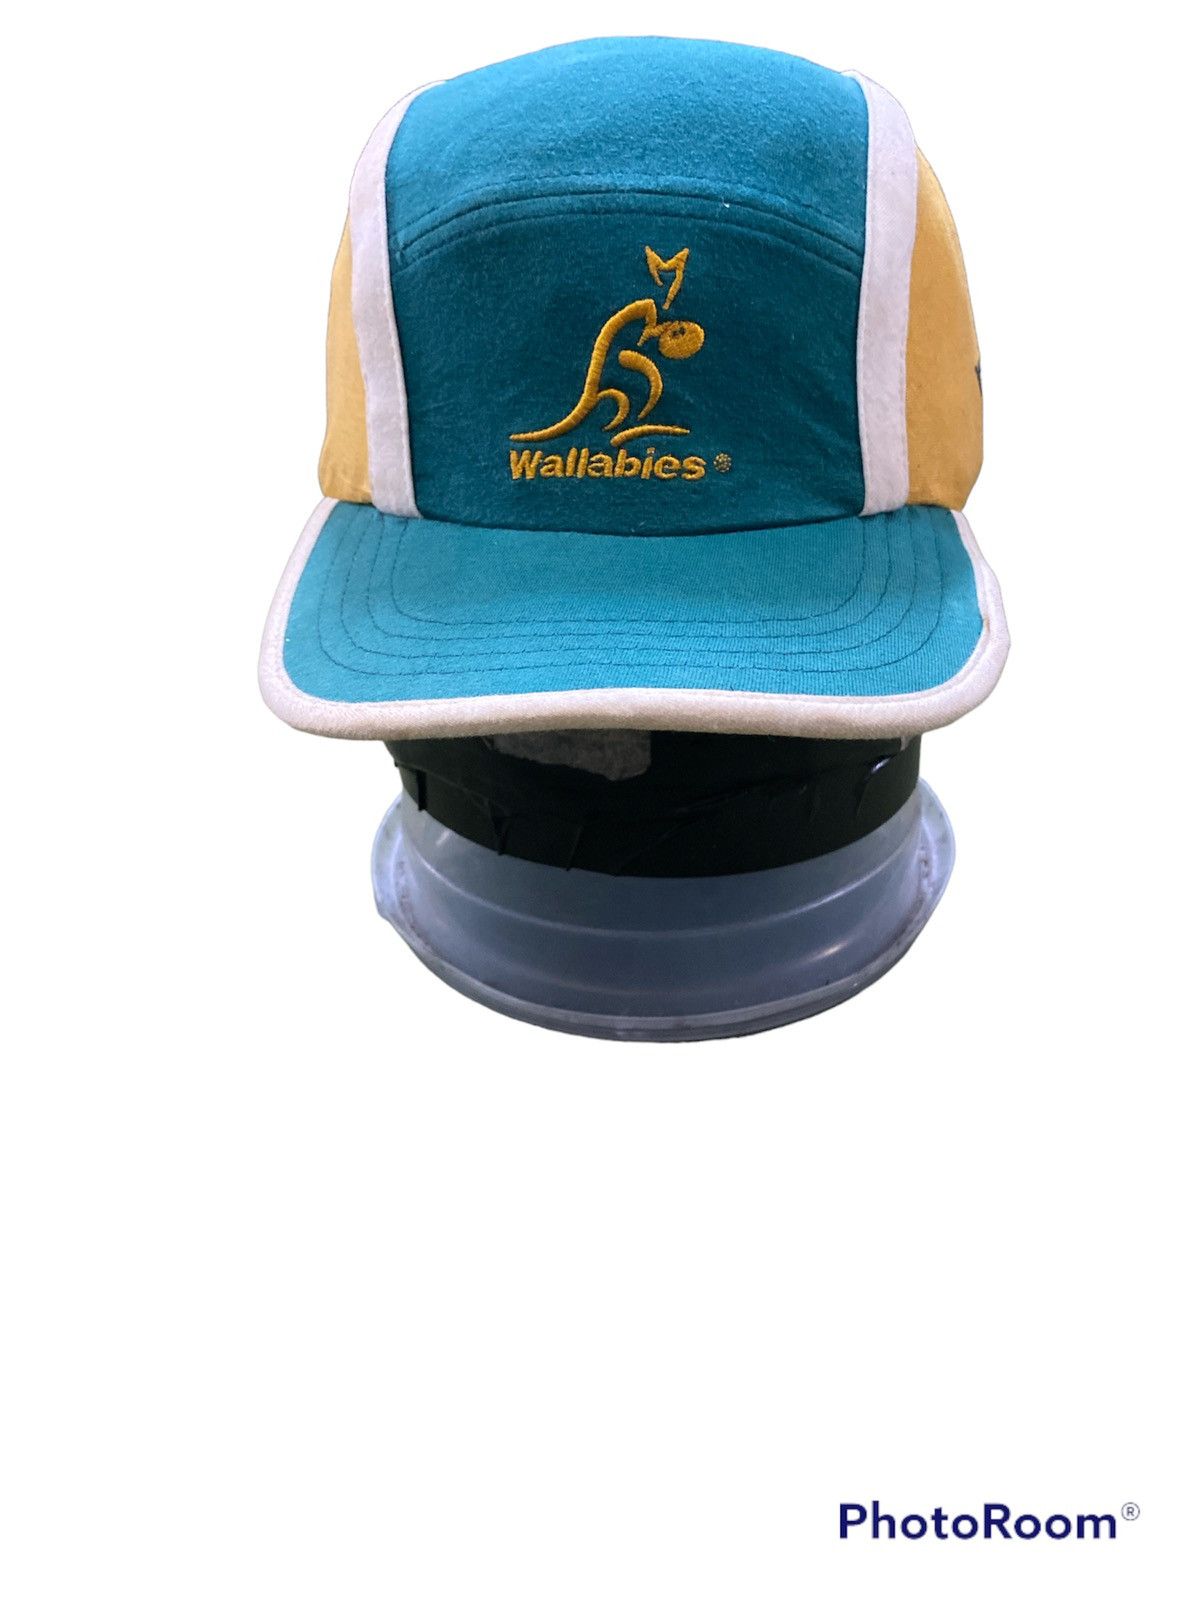 Vintage - Rare Iconic Canterbury Australia Wallabies Rugby Hats - 1